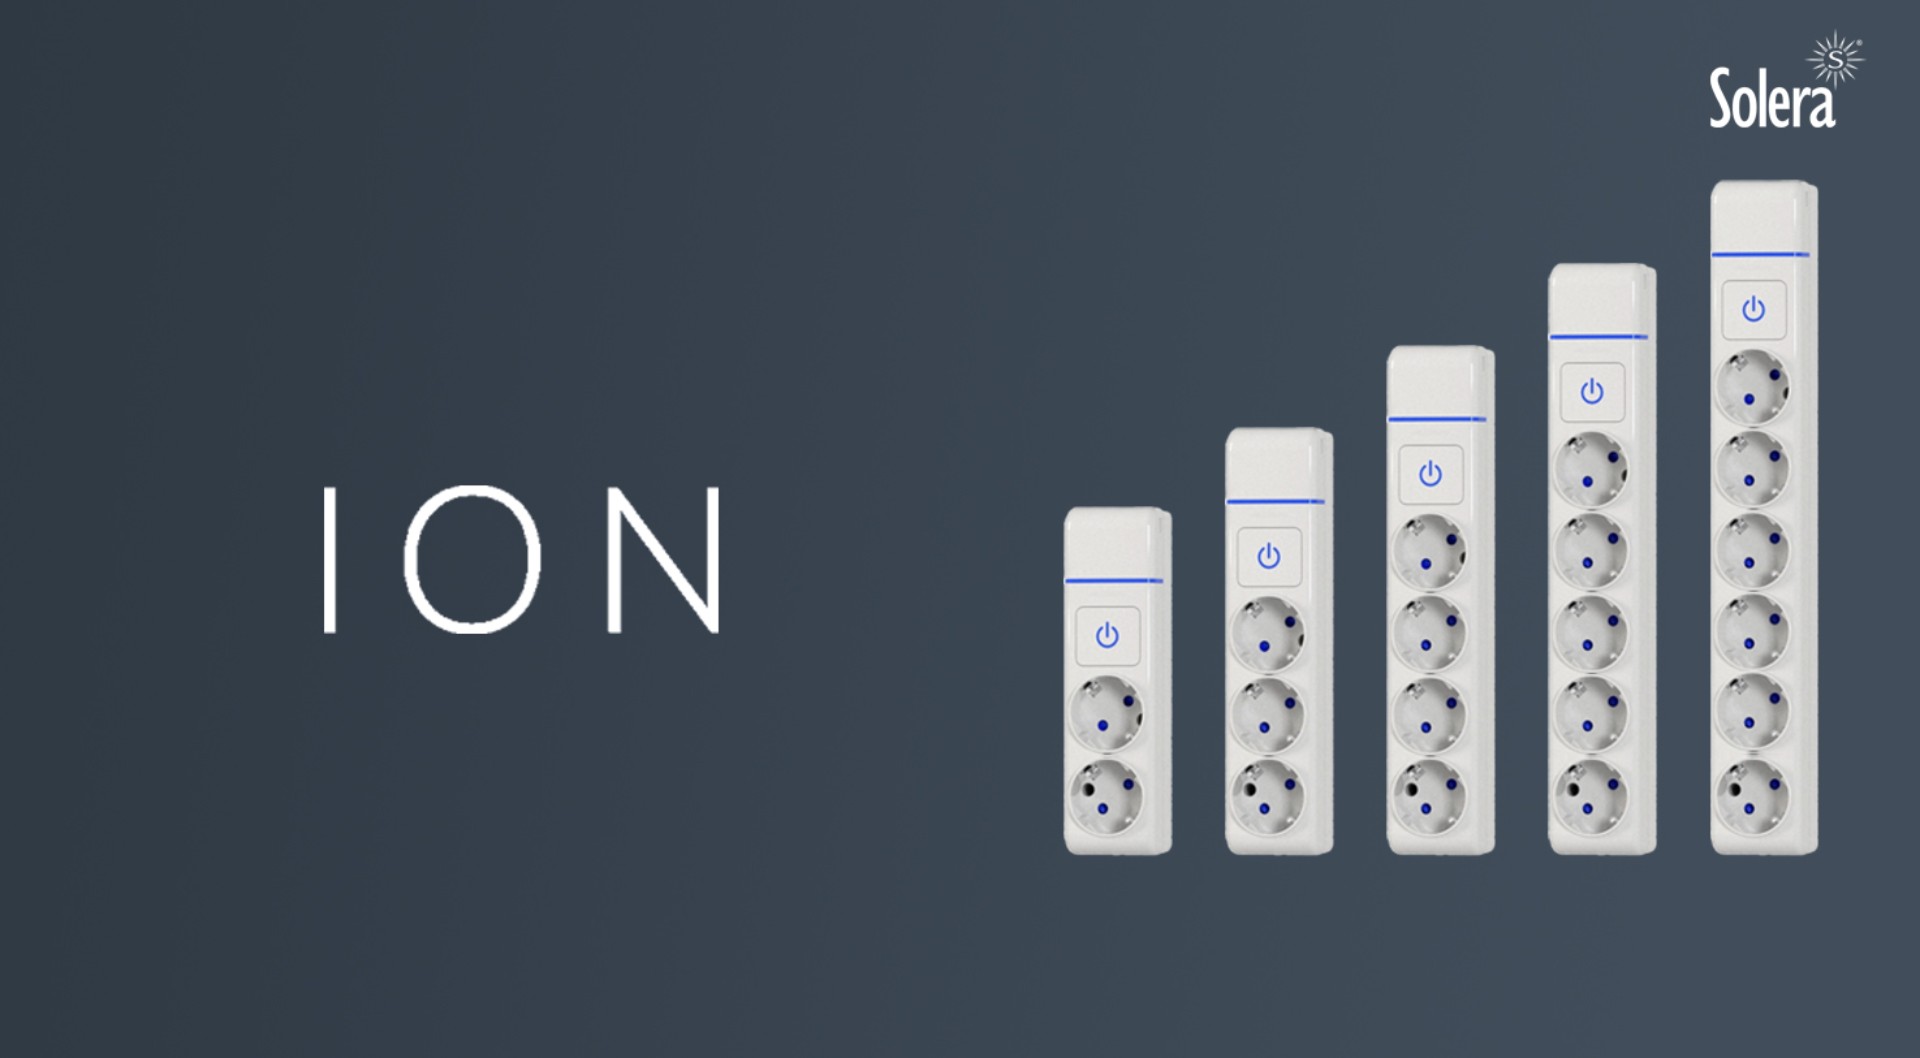 Have you discovered all of Solera's ION multi-sockets?